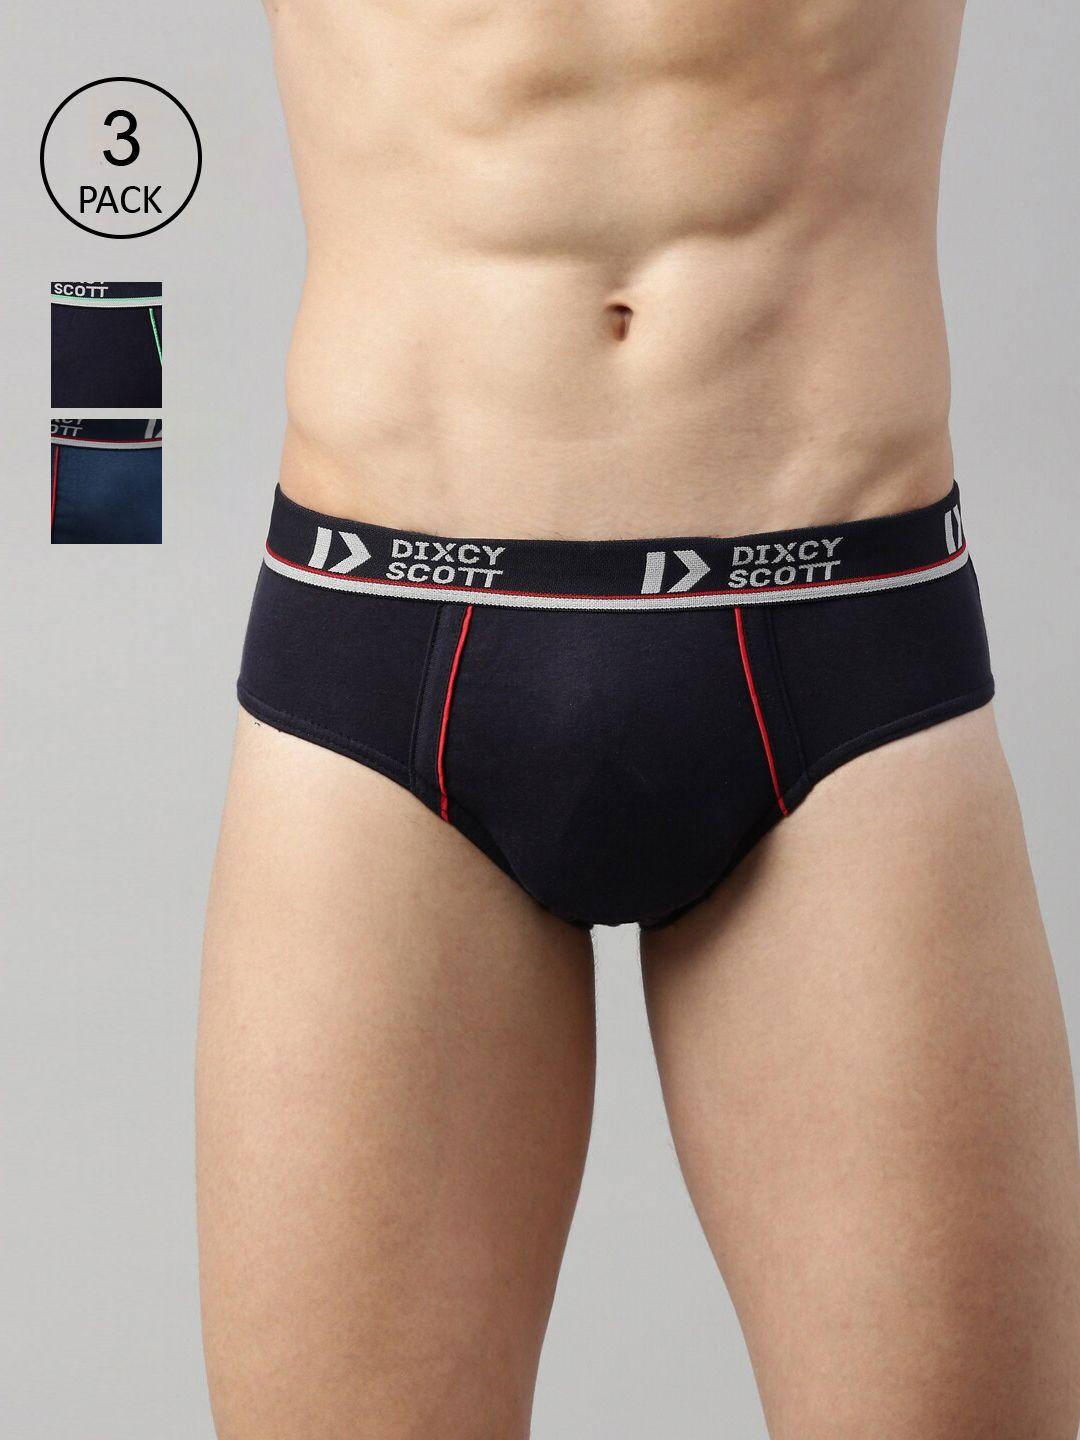 dixcy-scott-men-pack-of-3-blue-solid-cotton-basic-briefs-dso-replay-brief-p3